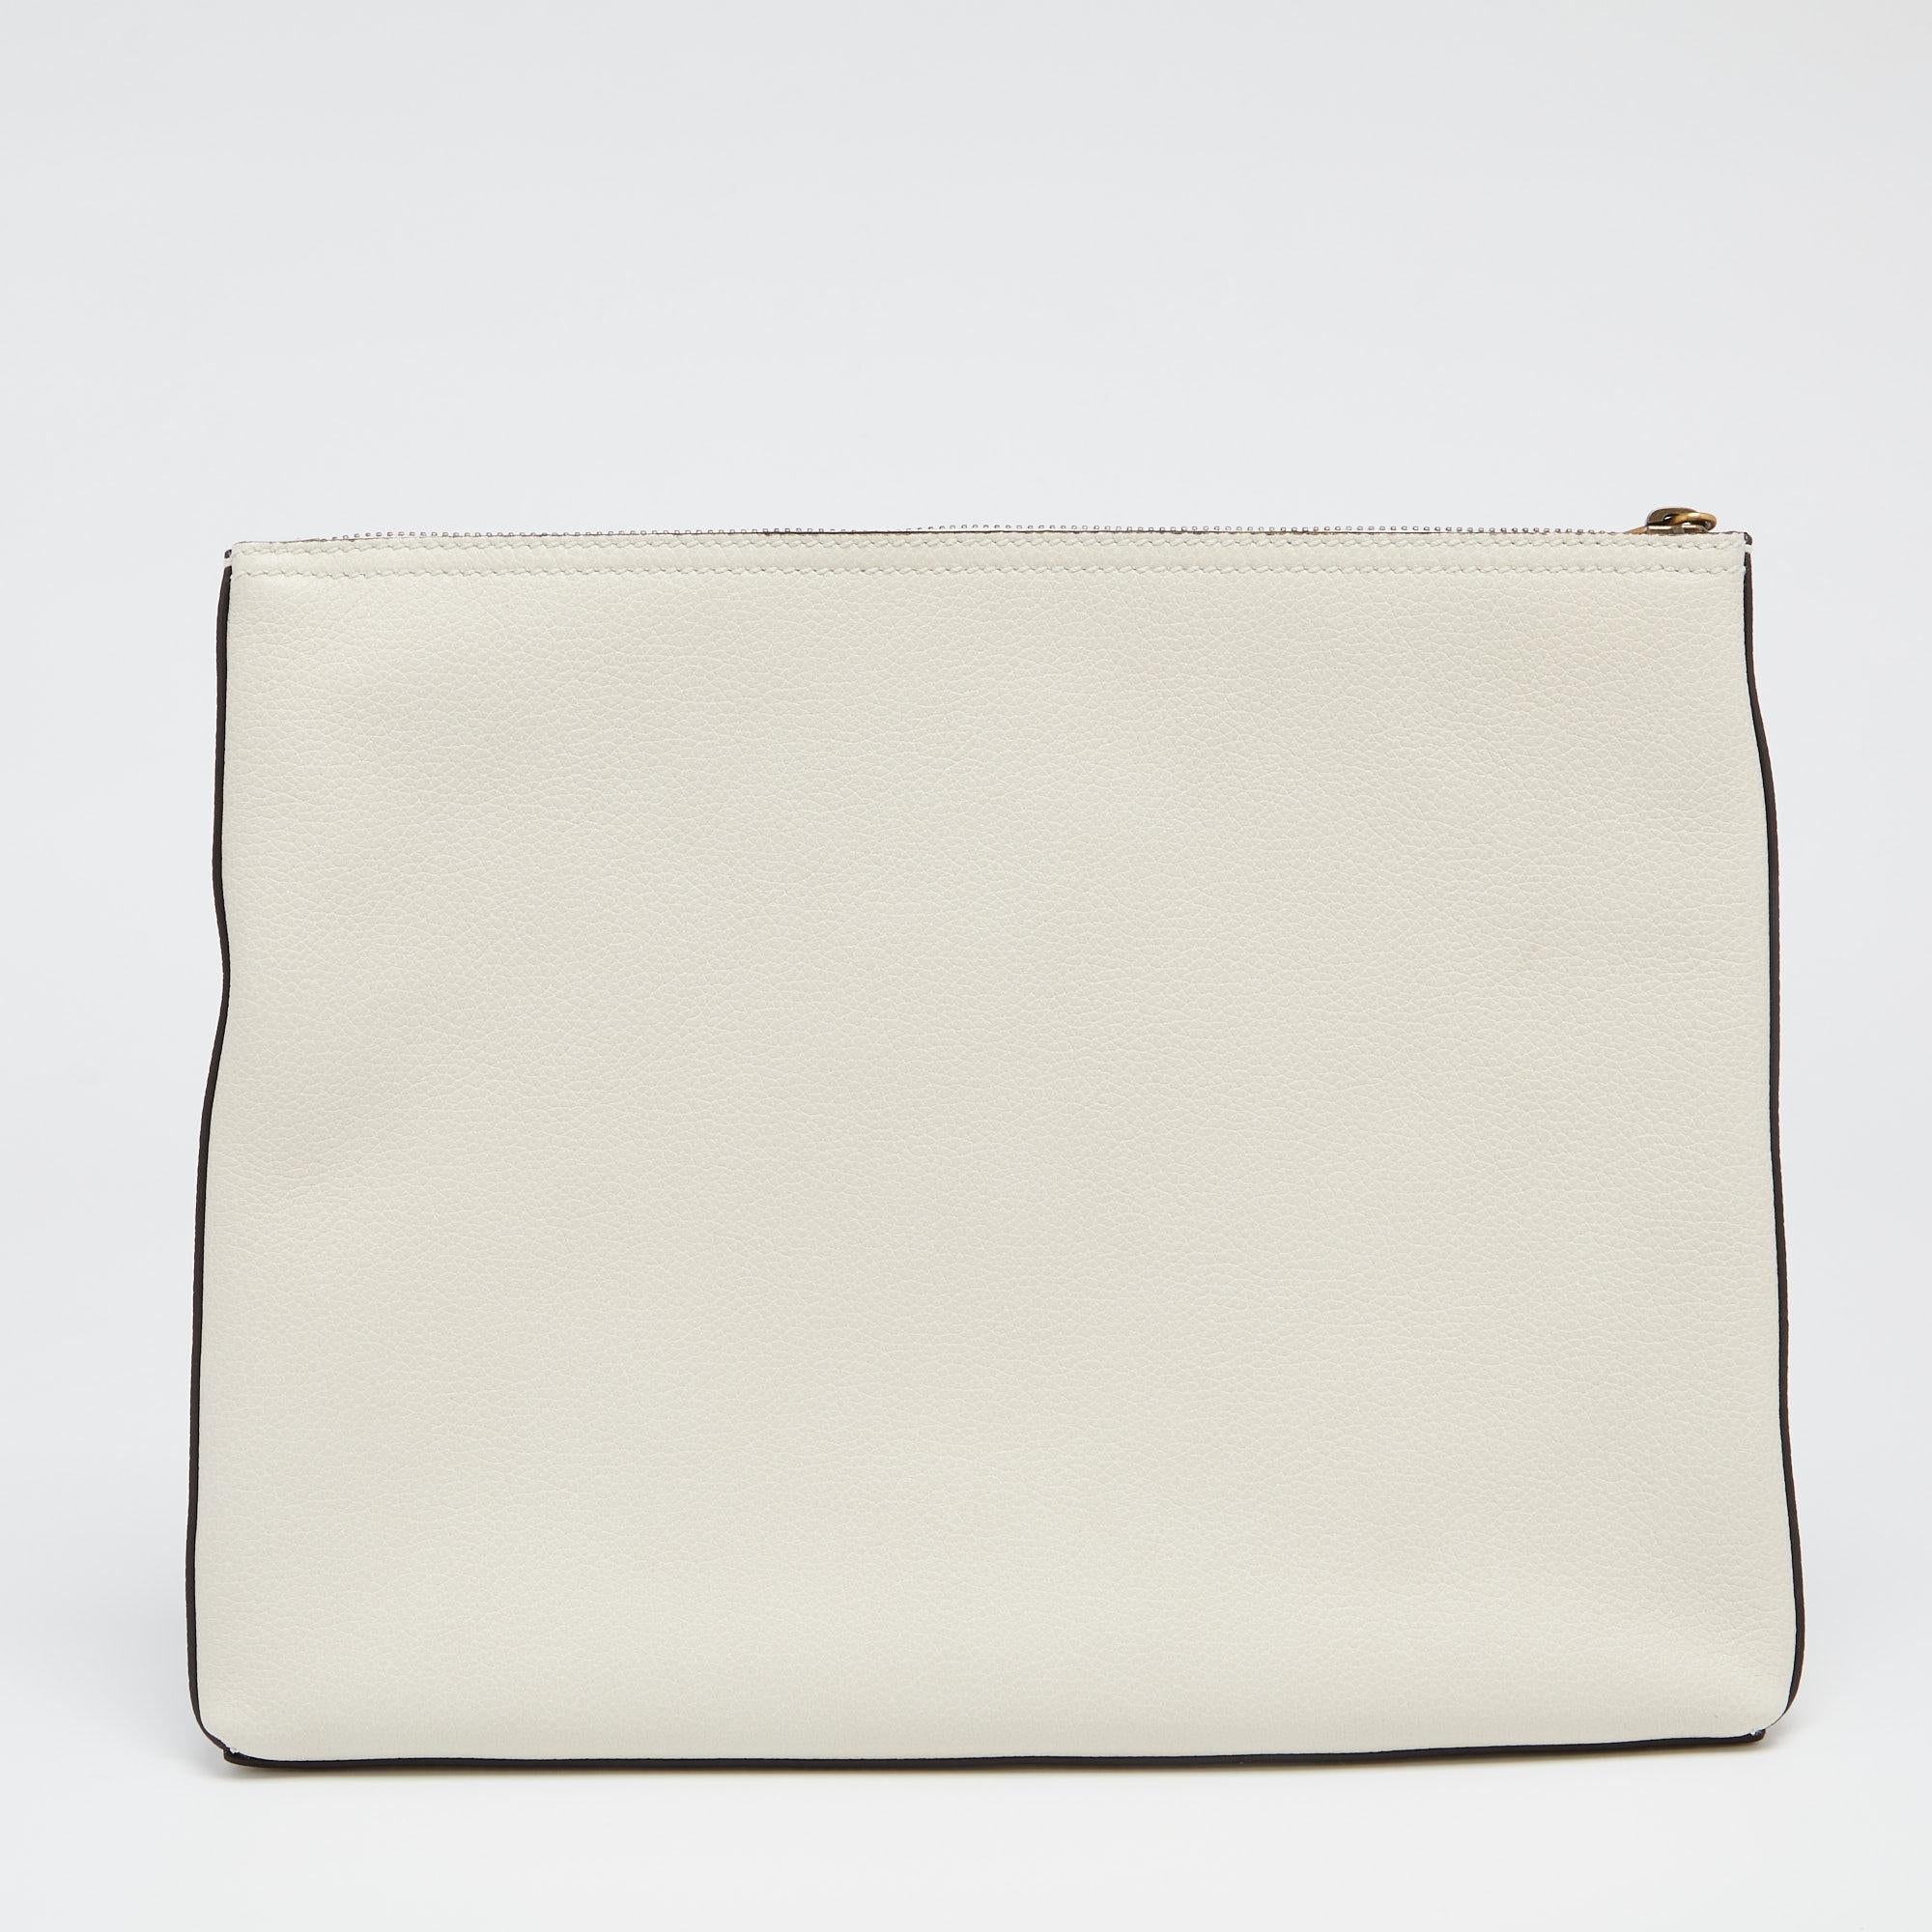 This women's pouch from Gucci has been made using quality leather in Italy. It has a suede-lined interior that is secured by a top zip closure. This white pouch has a simple shape and brand details printed on the front.

Includes: Original Dustbag,